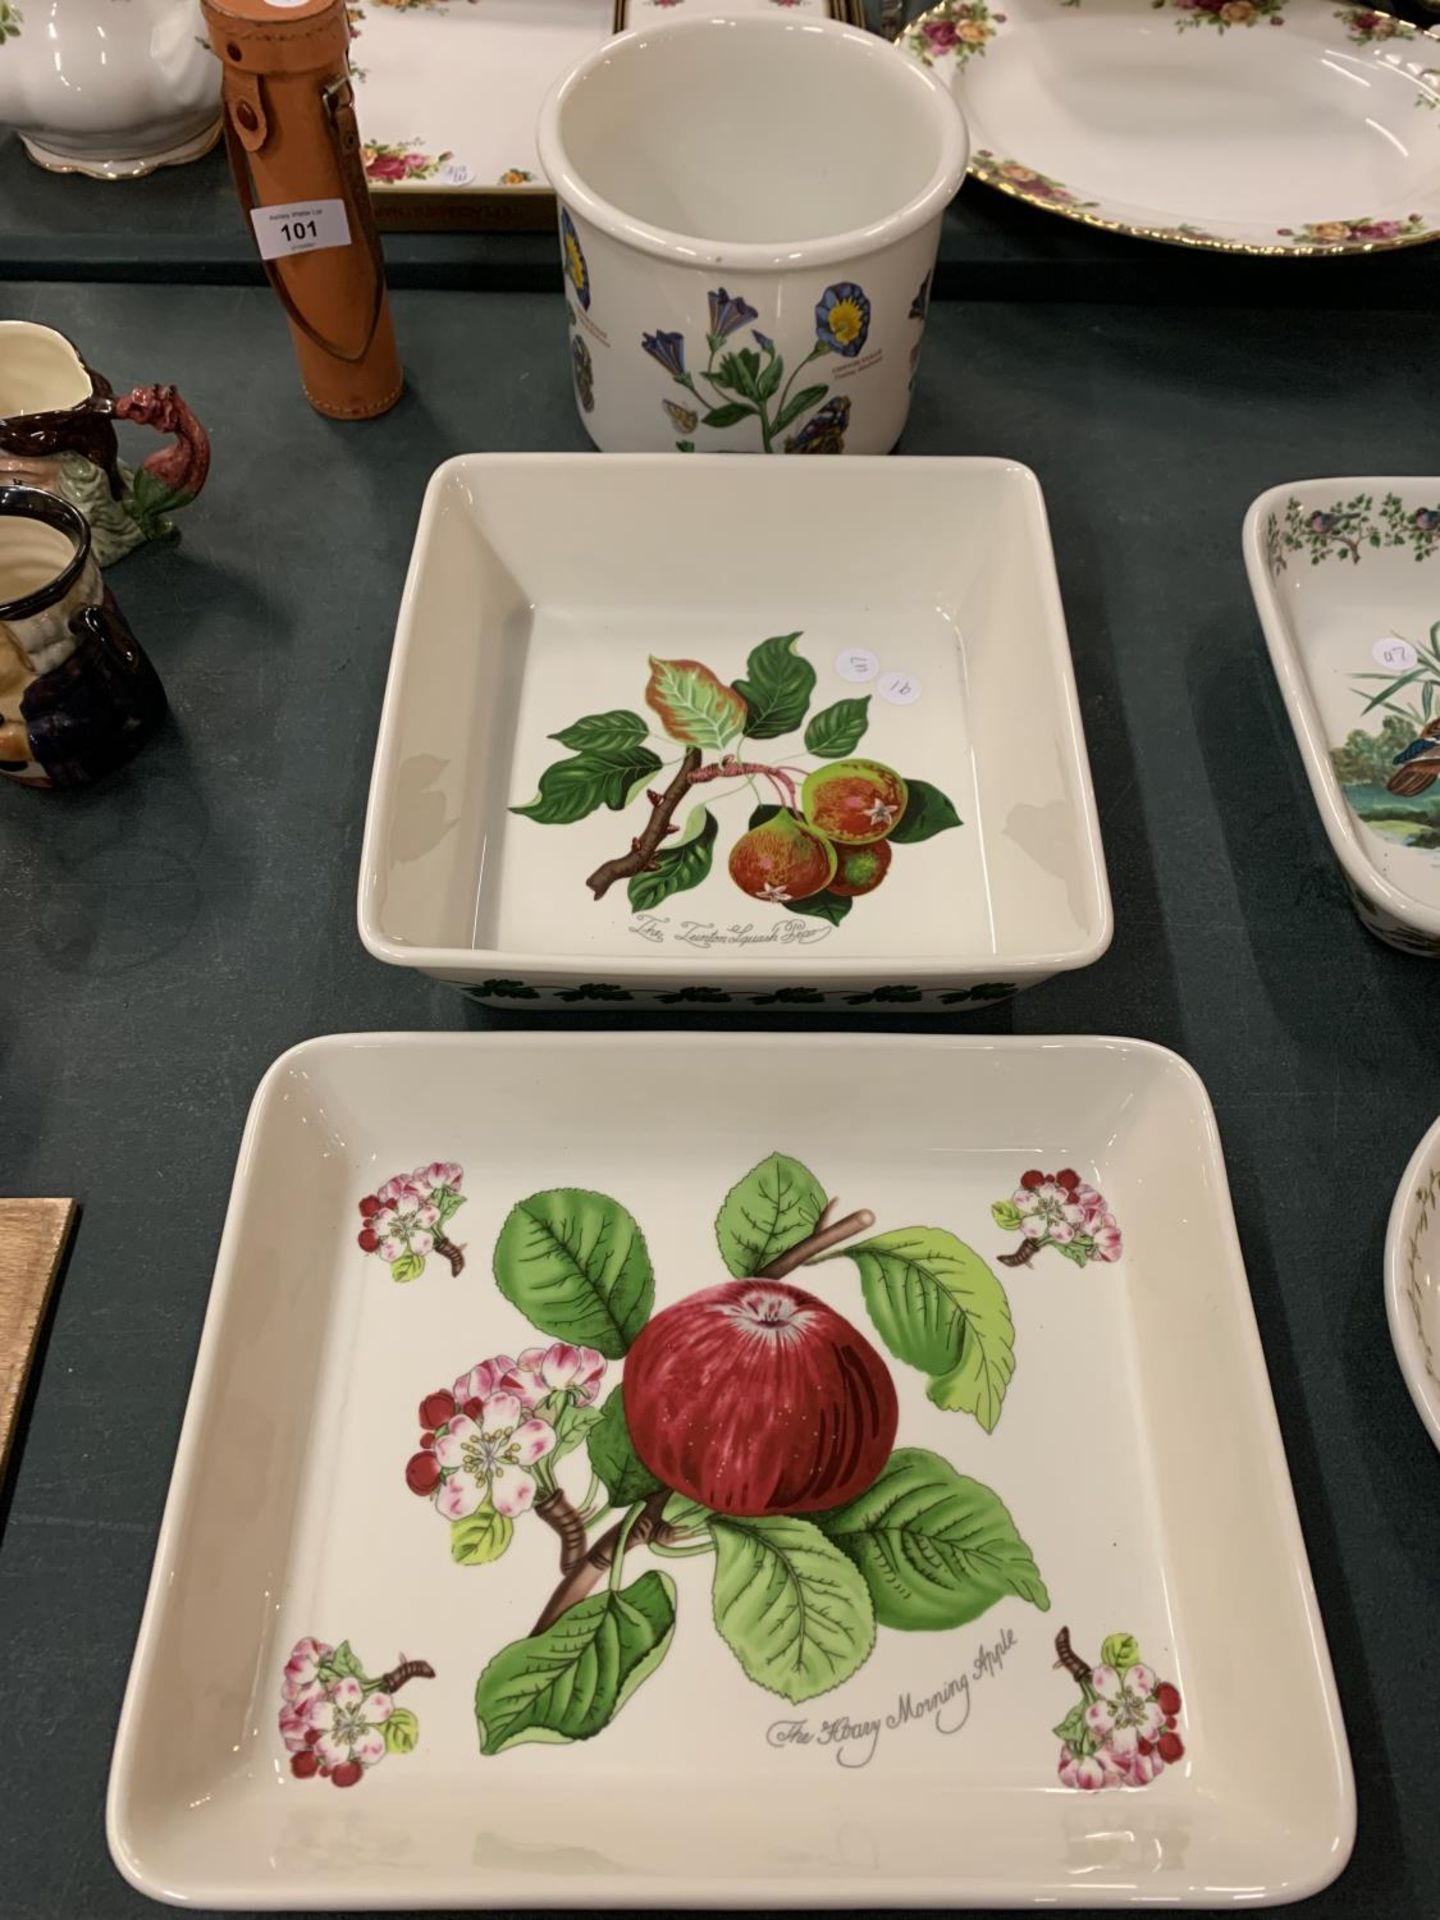 THREE PORTMERION DISHES DECORATED WITH FLORAL THEMES